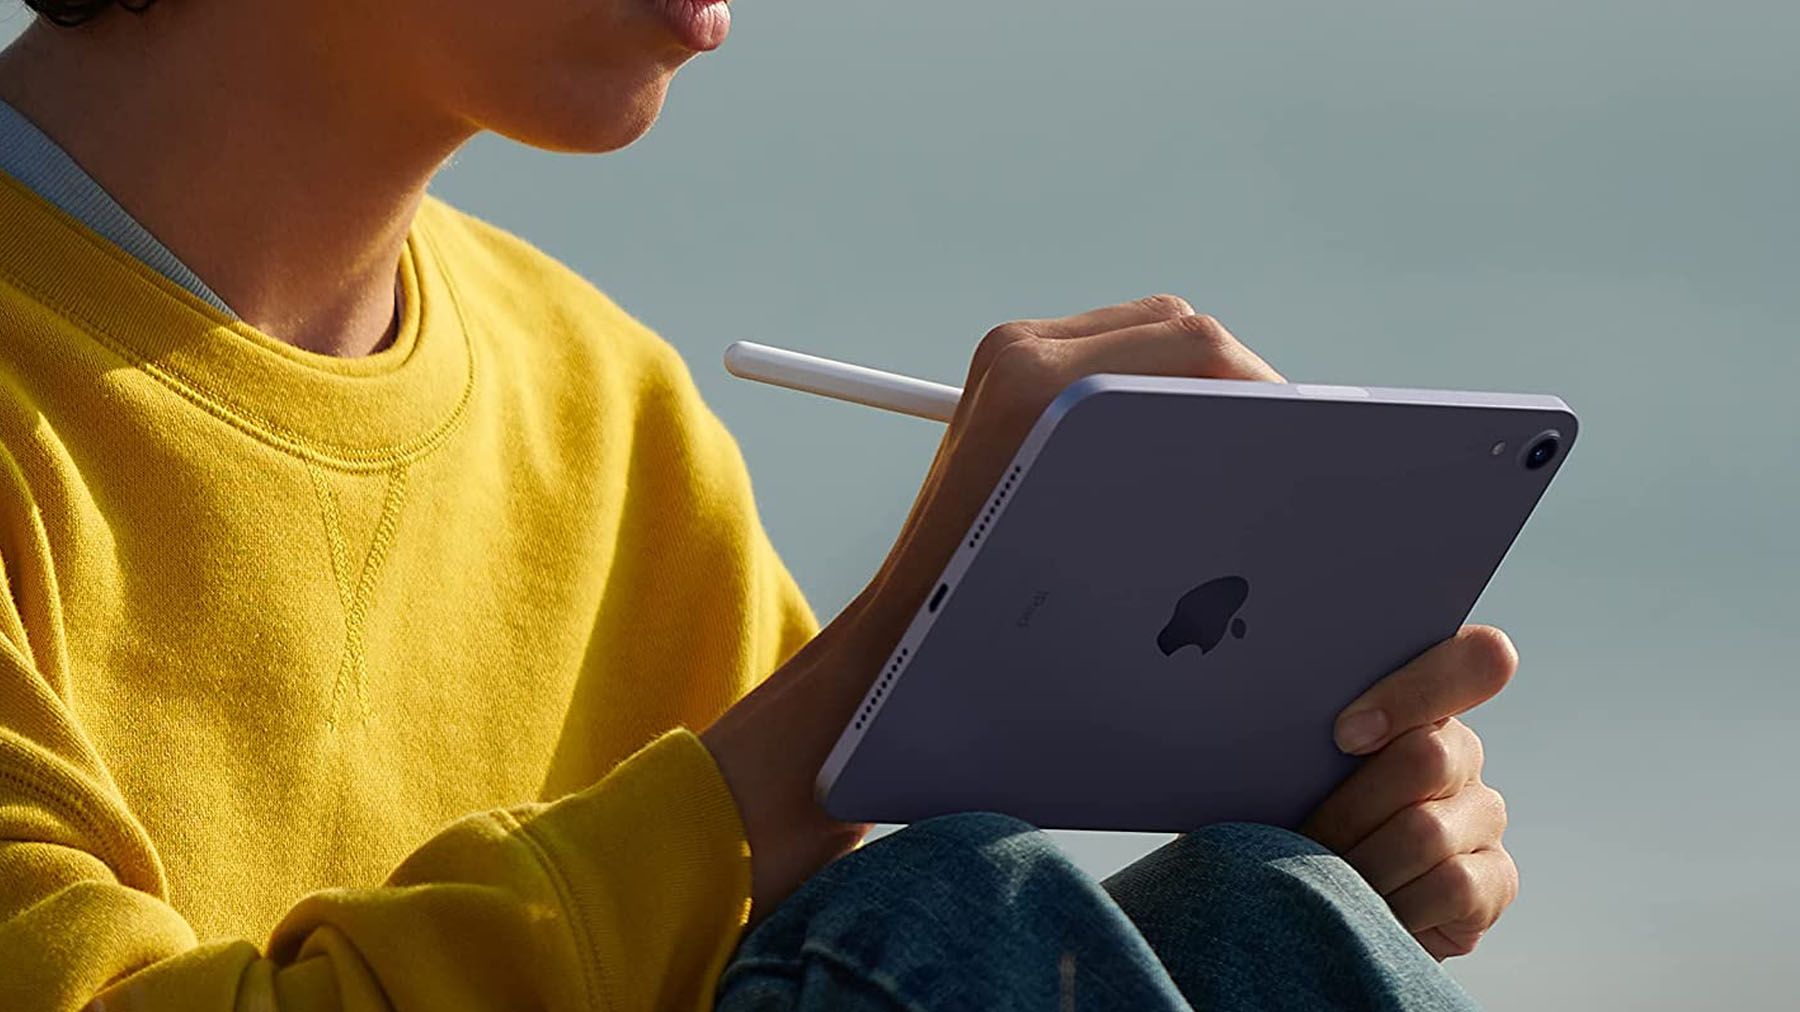 A photo of someone sitting on an iPad Mini while using an Apple Pencil